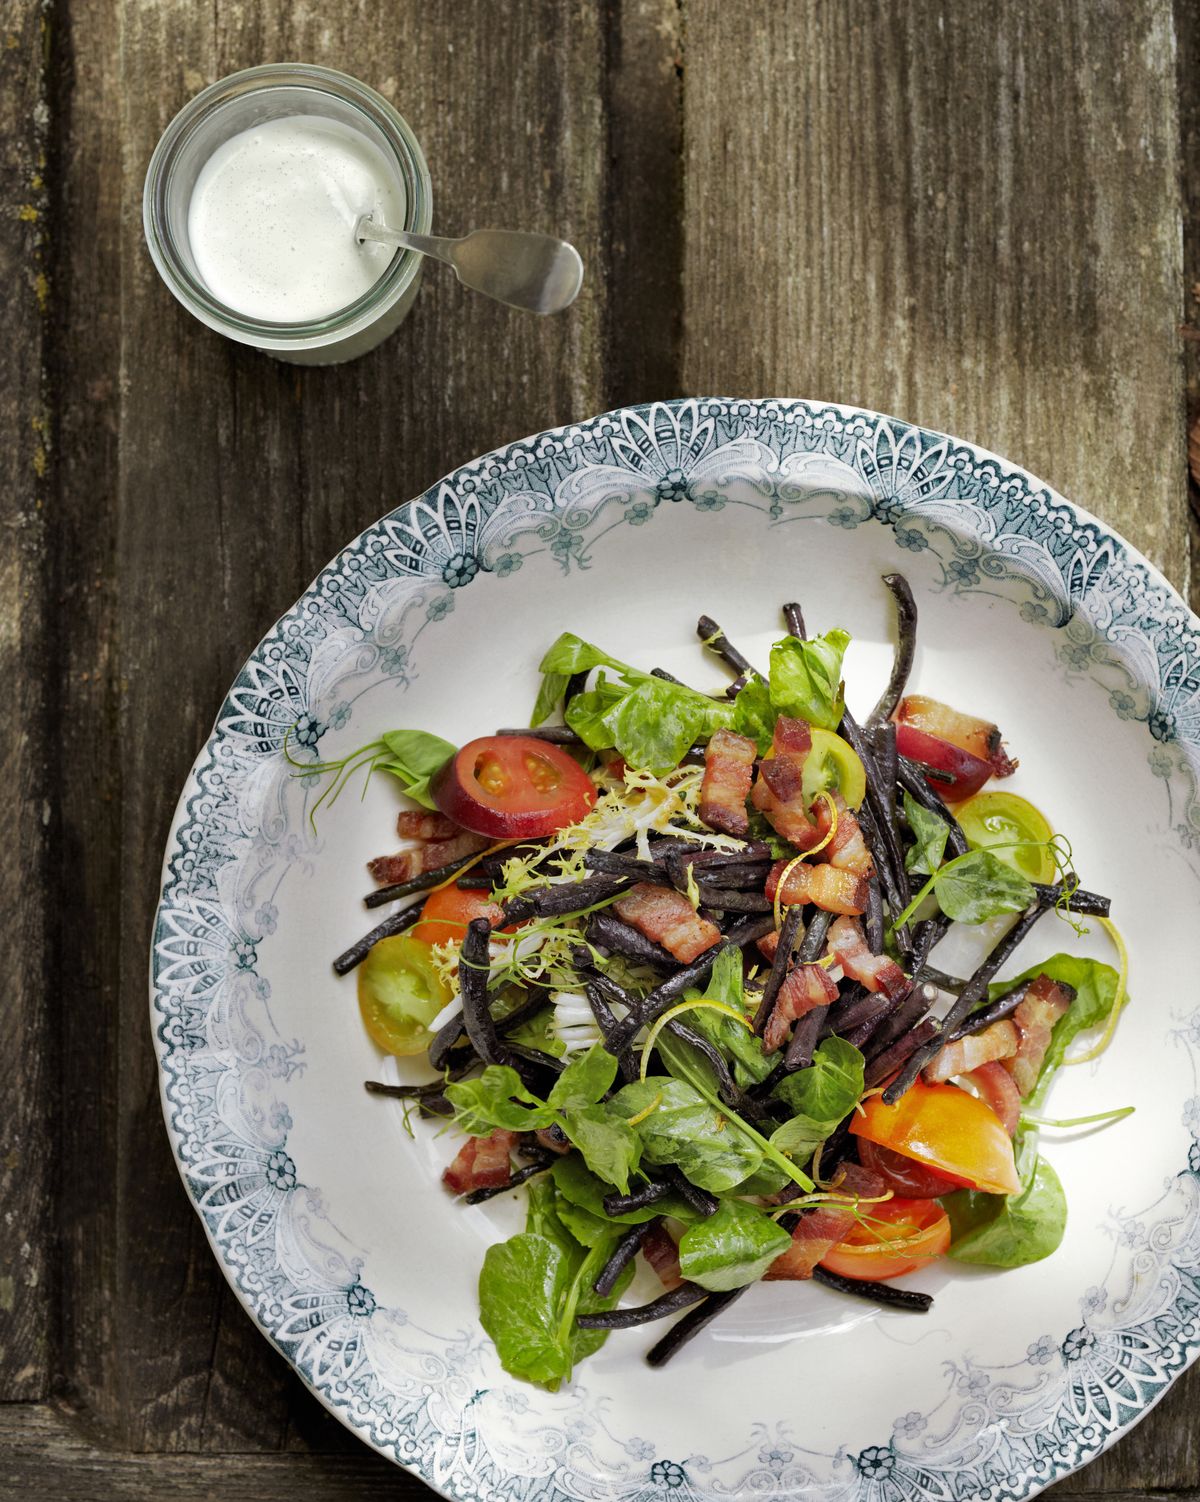 blistered bean salad with buttermilk dressing